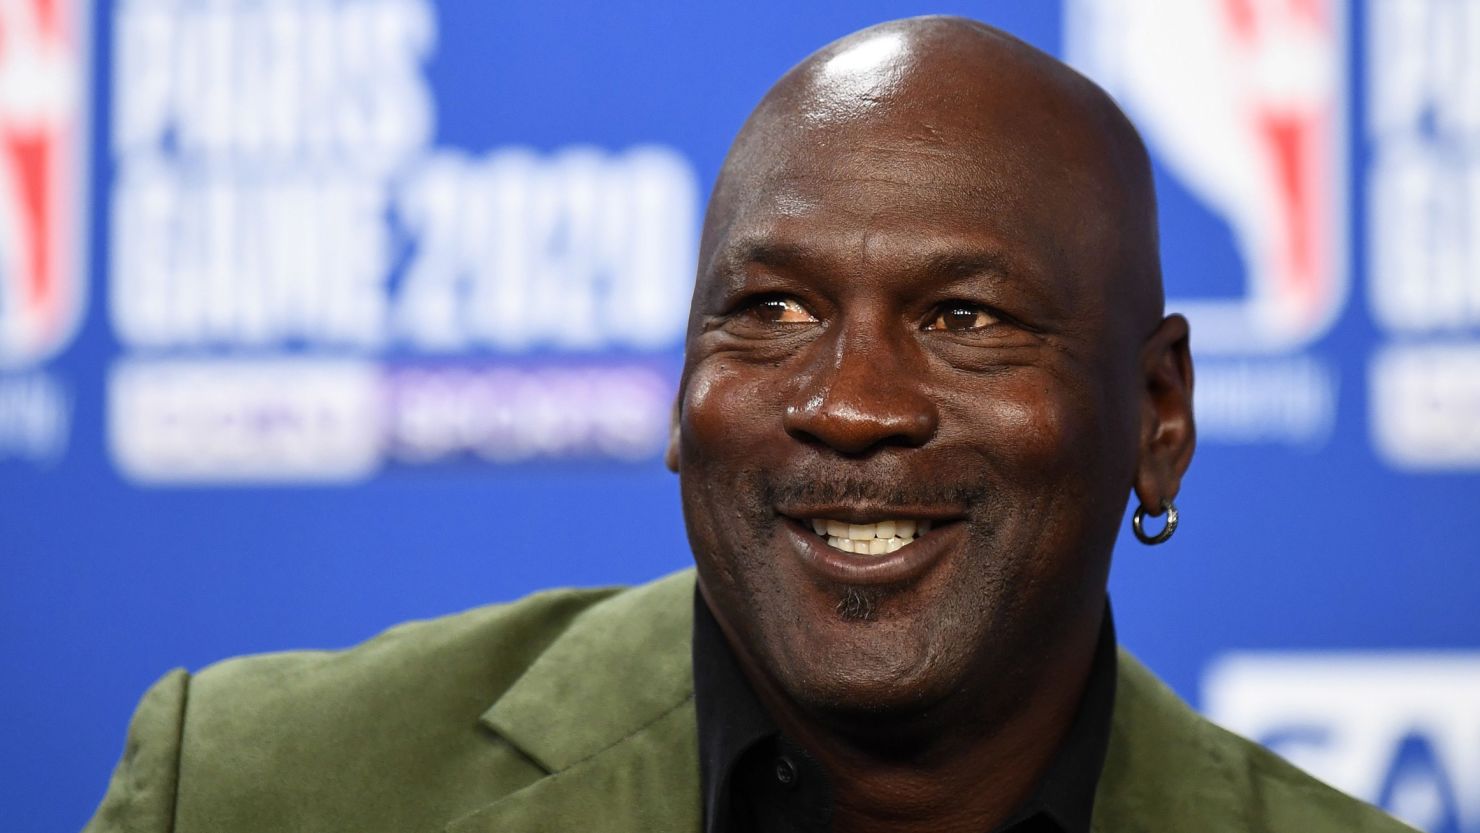 Former NBA star and owner of Charlotte Hornets team Michael Jordan, pictured here in January 2020, is donating $10 million to open two new medical clinics in North Carolina. 